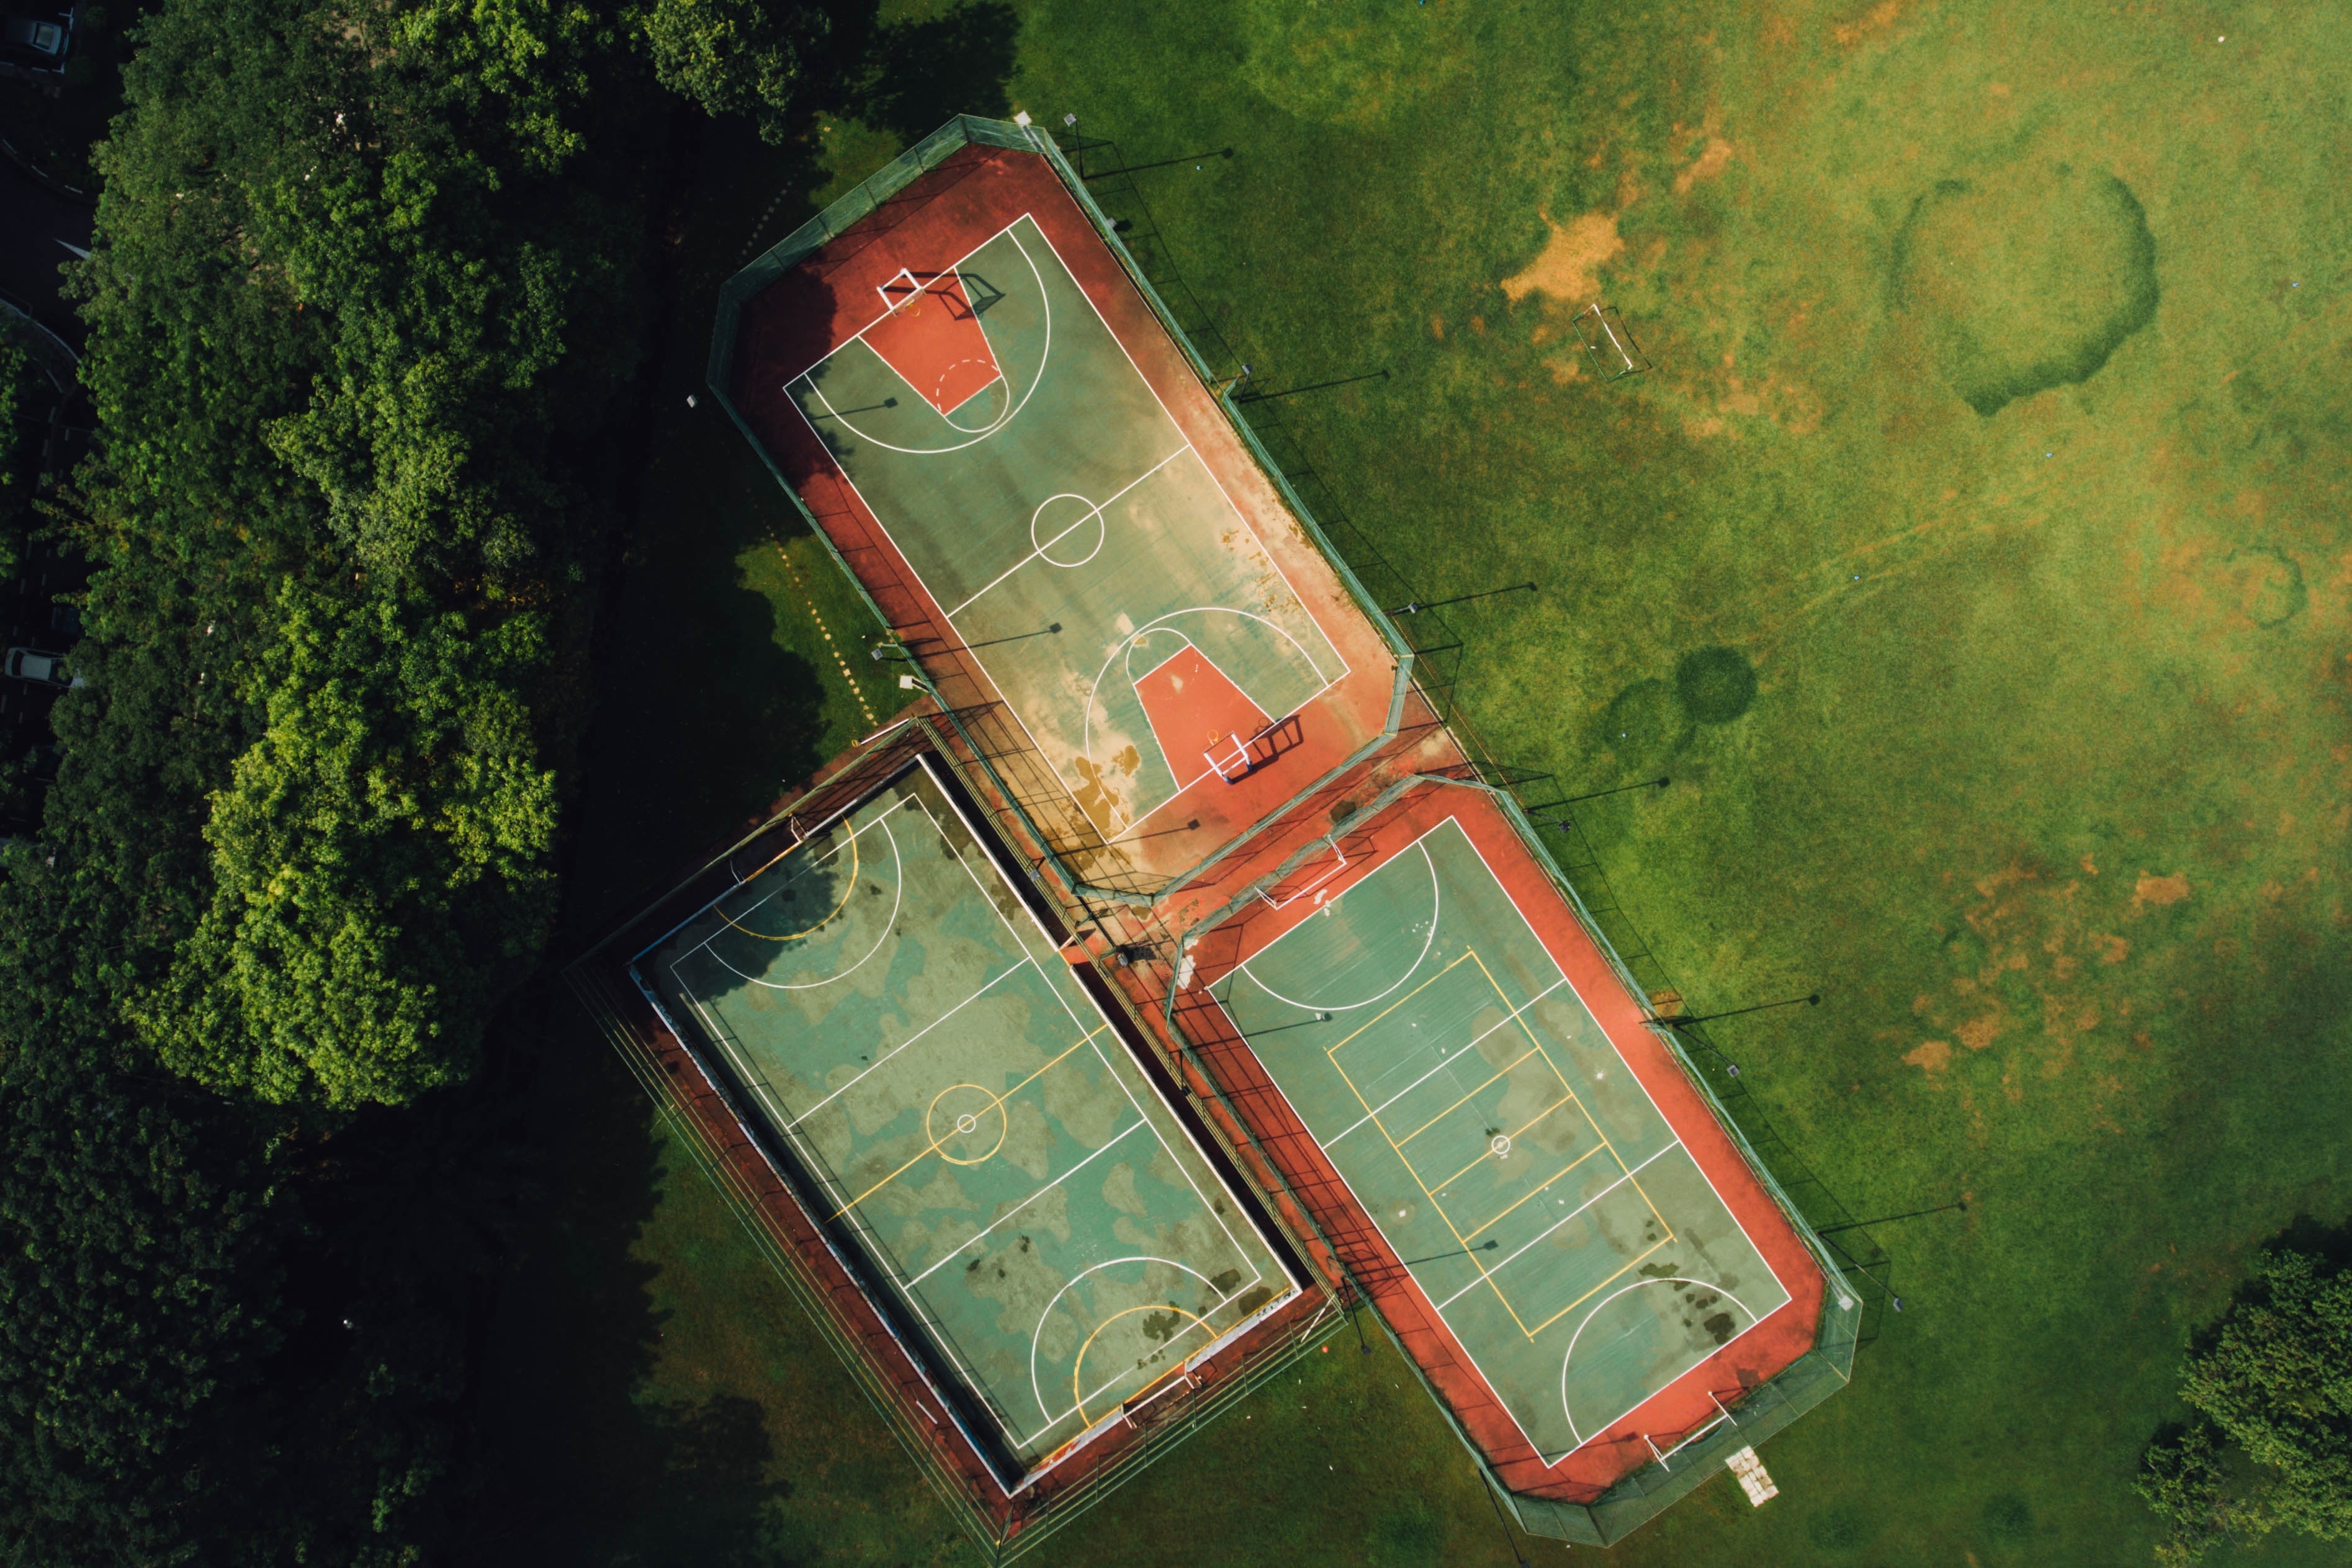 birds eye photography of three sports courts near tree during daytime